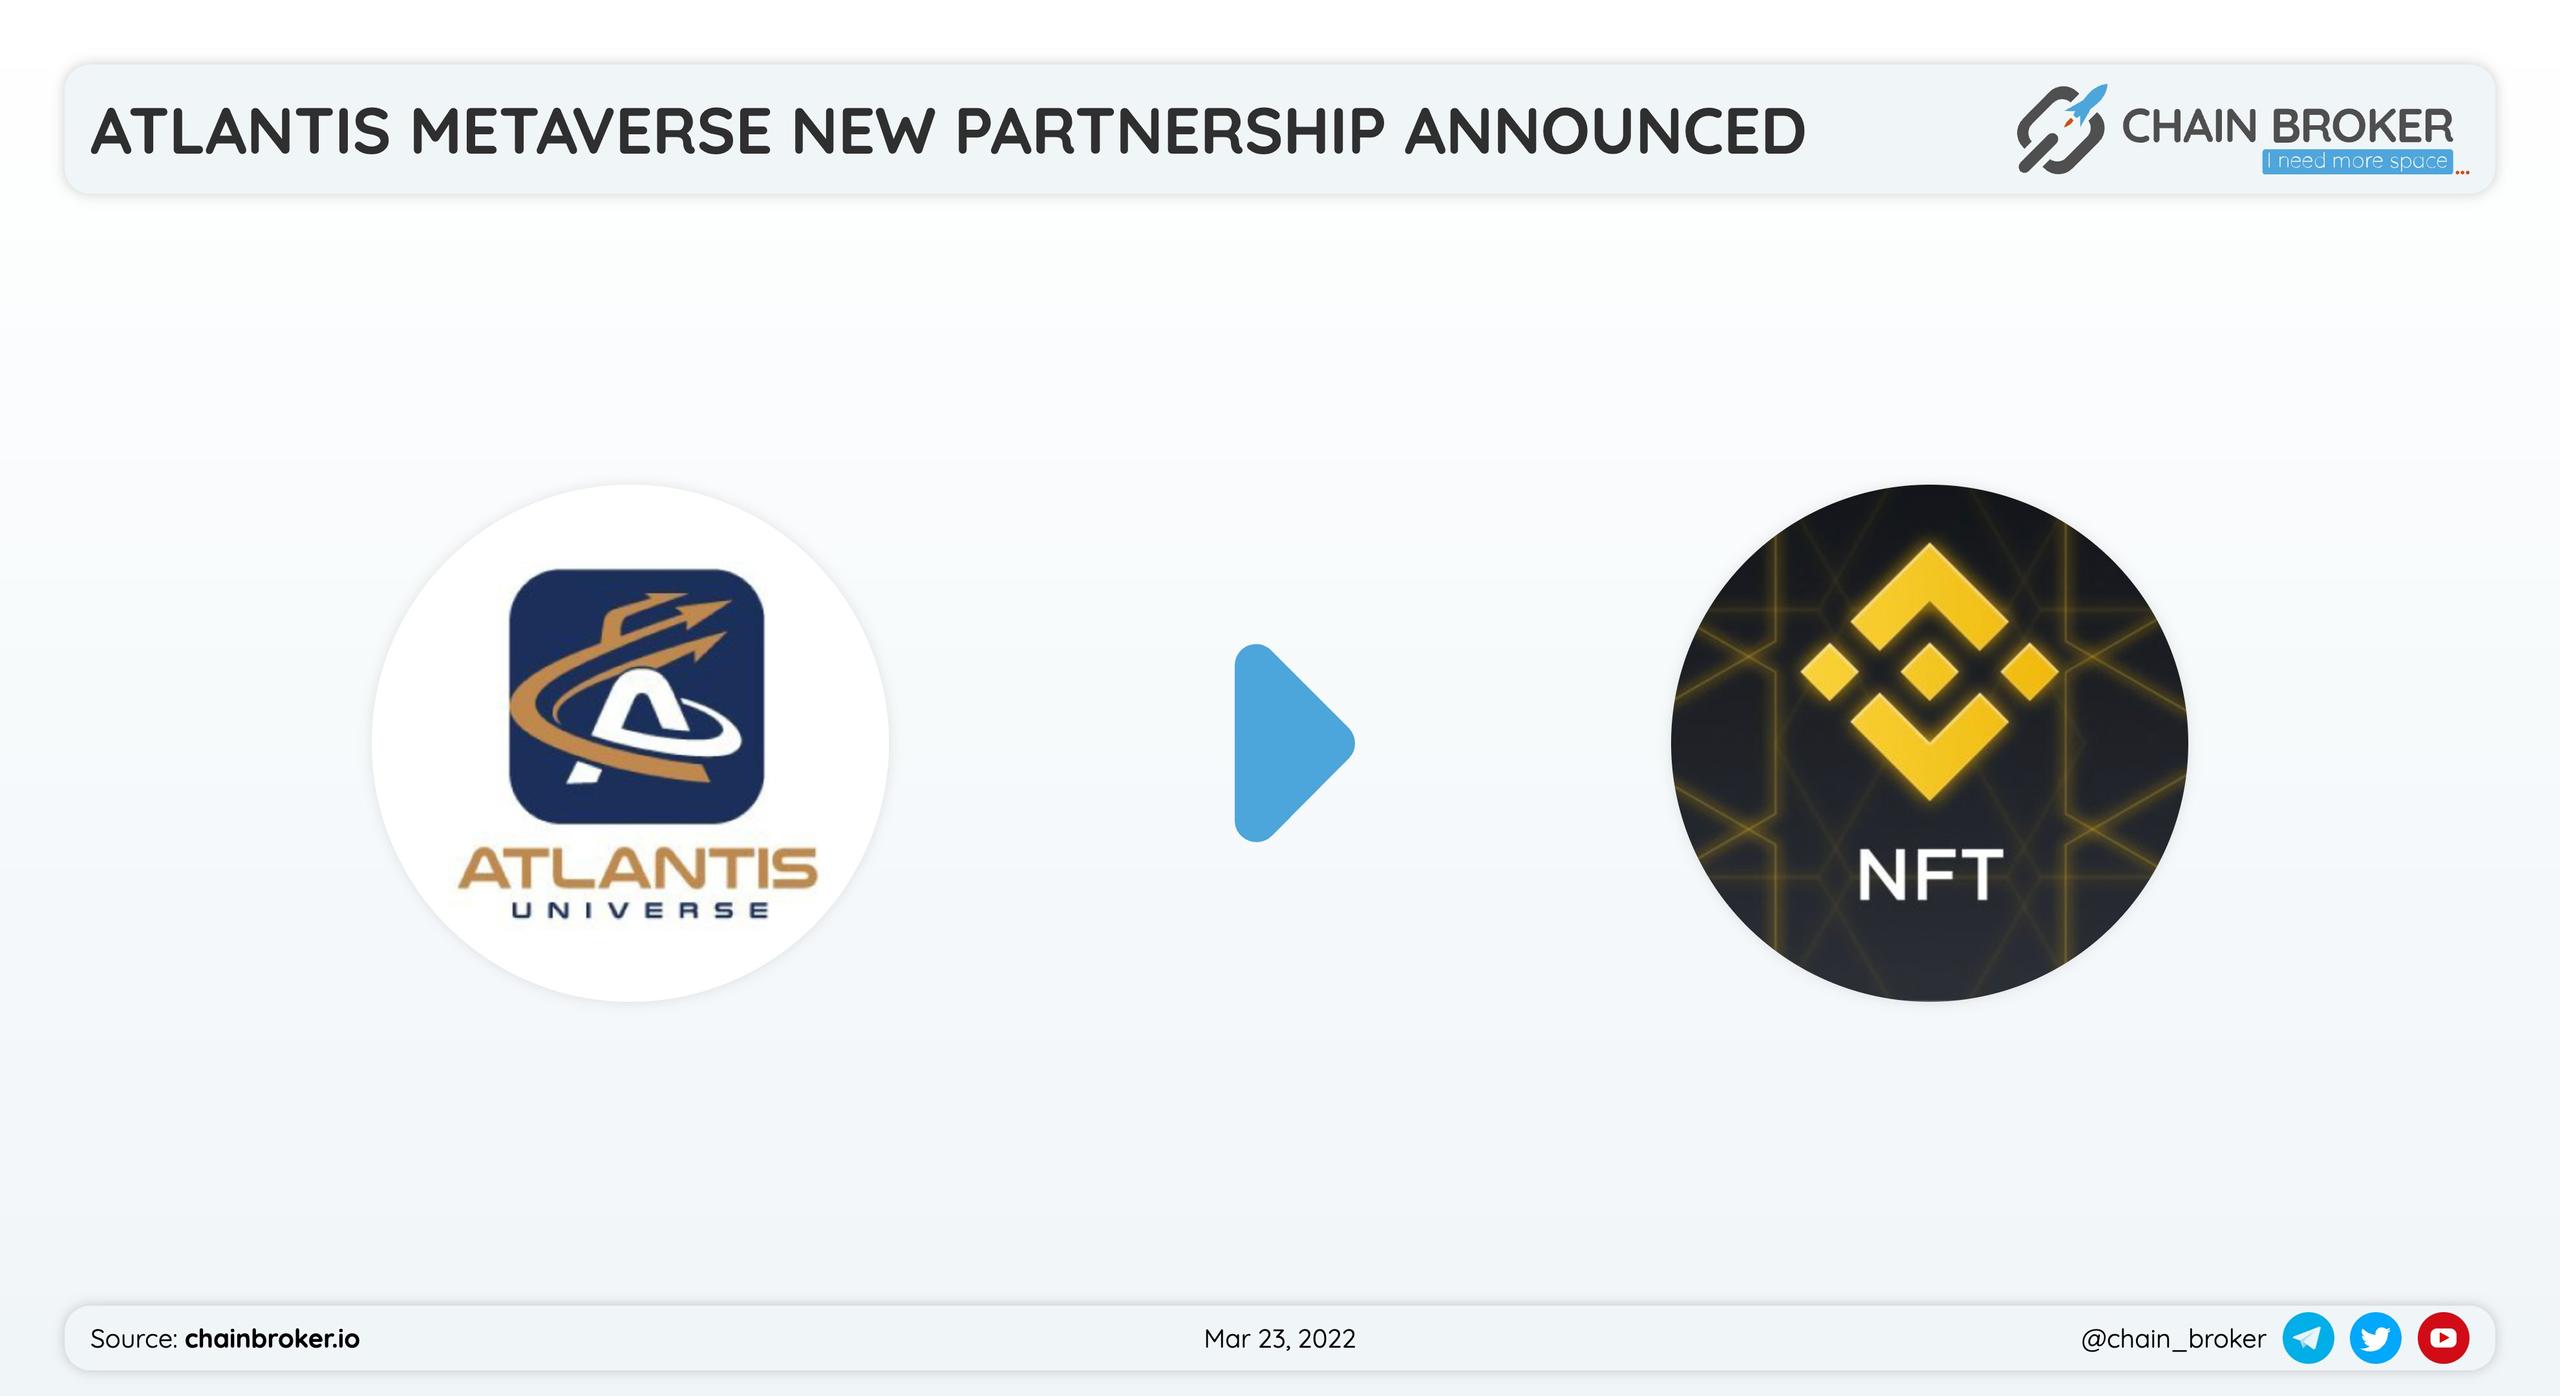 Atlantis has partnered with The Binance NFT for an NFT adoption.